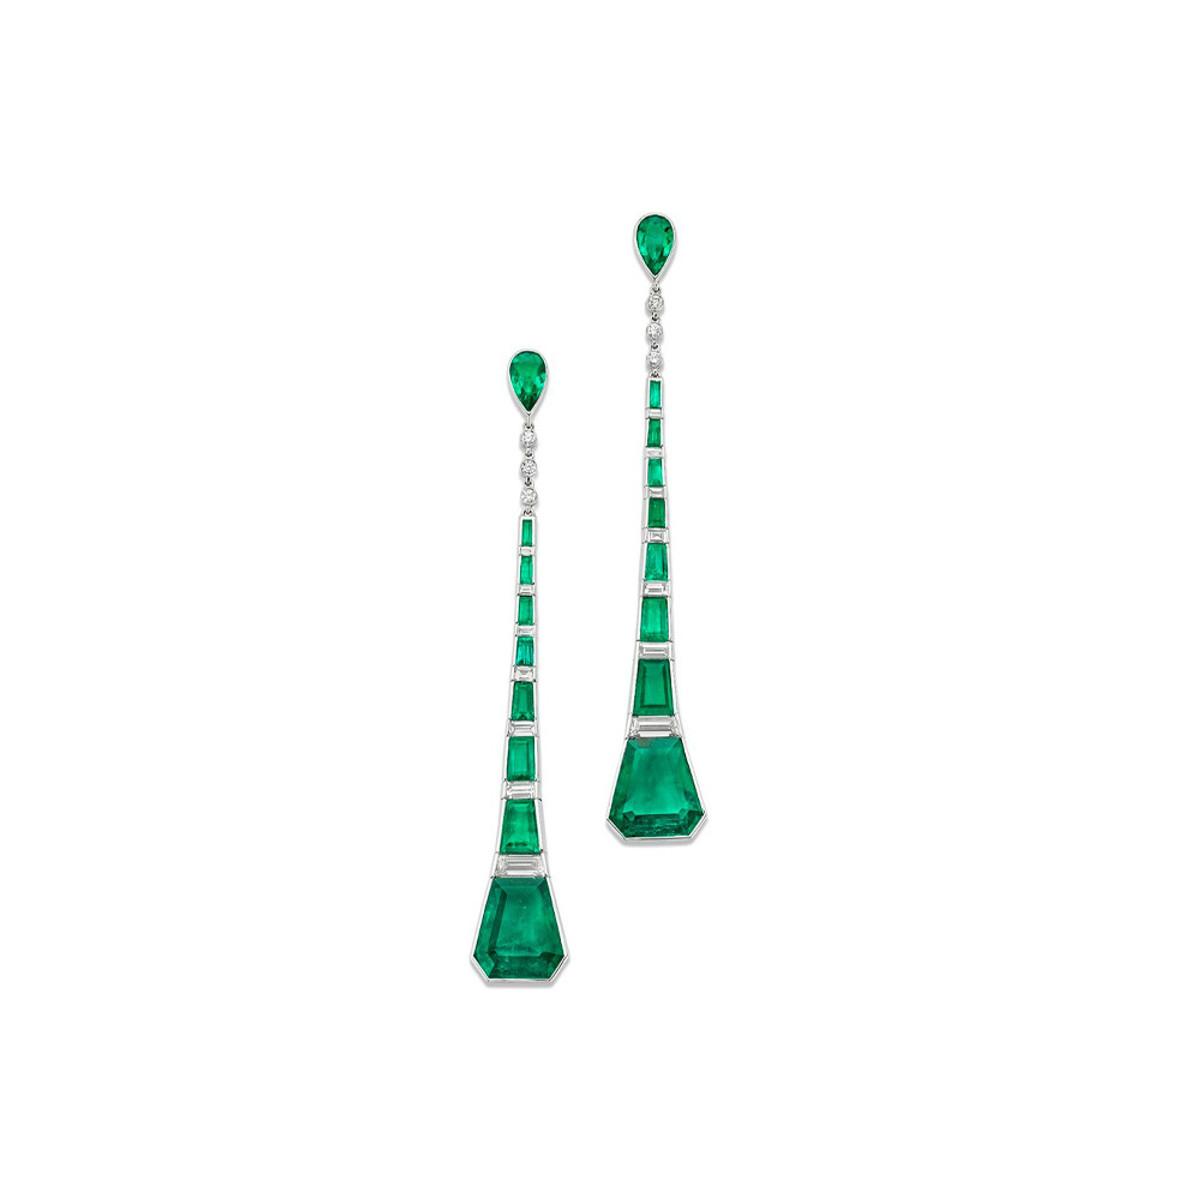 Hyde Park Collection Platinum Emerald & Diamond Earrings-54468 Product Image